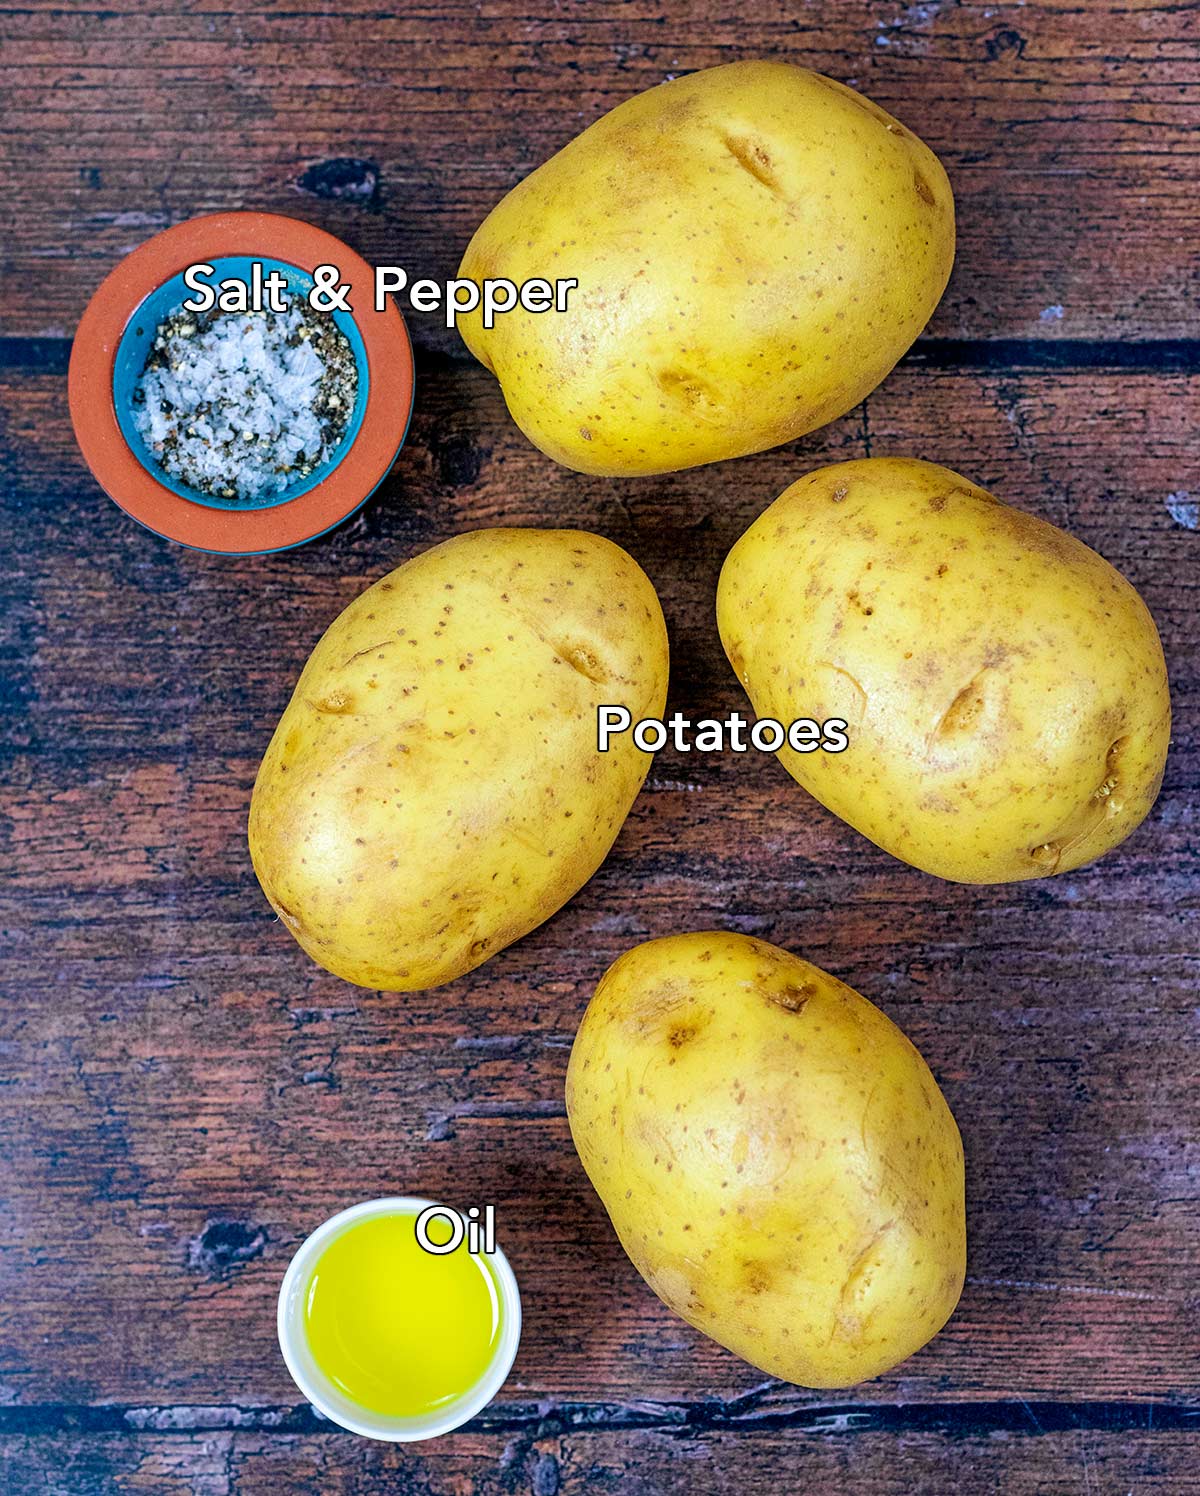 Four potatoes, a pot of seasoning and a small bowl of oil on a wooden surface with text overlay labels.